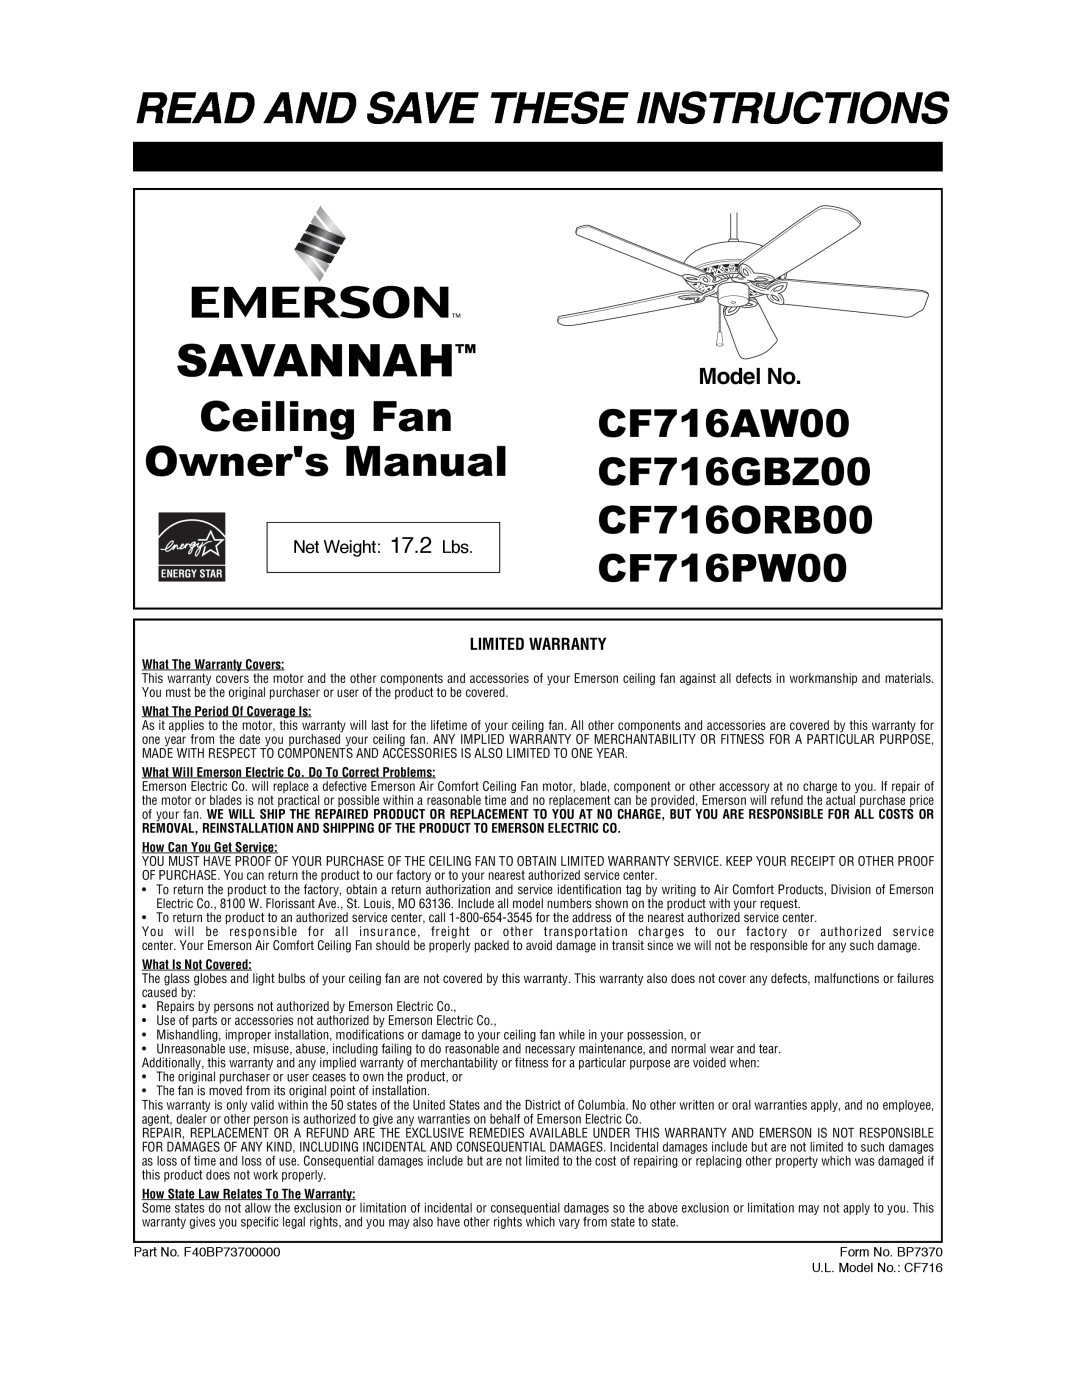 Emerson CF716ORB00 warranty Read And Save These Instructions, Ceiling Fan, CF716AW00, CF716GBZ00, CF716PW00 